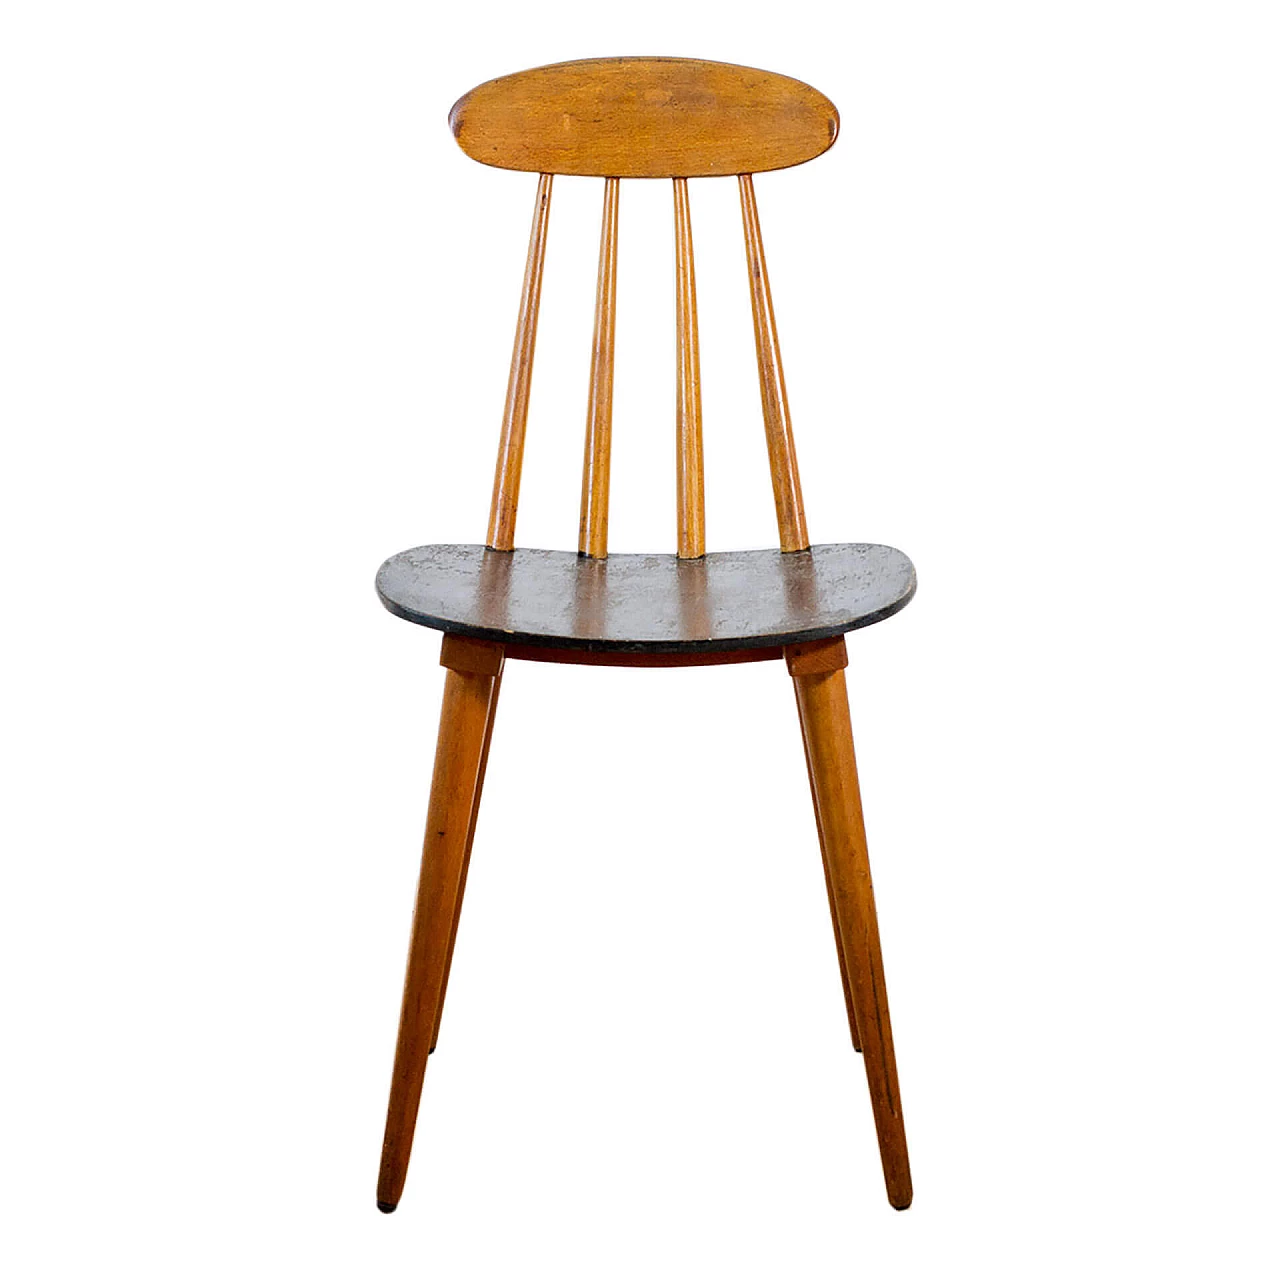 Danish style wooden chair, 50's style 1113410